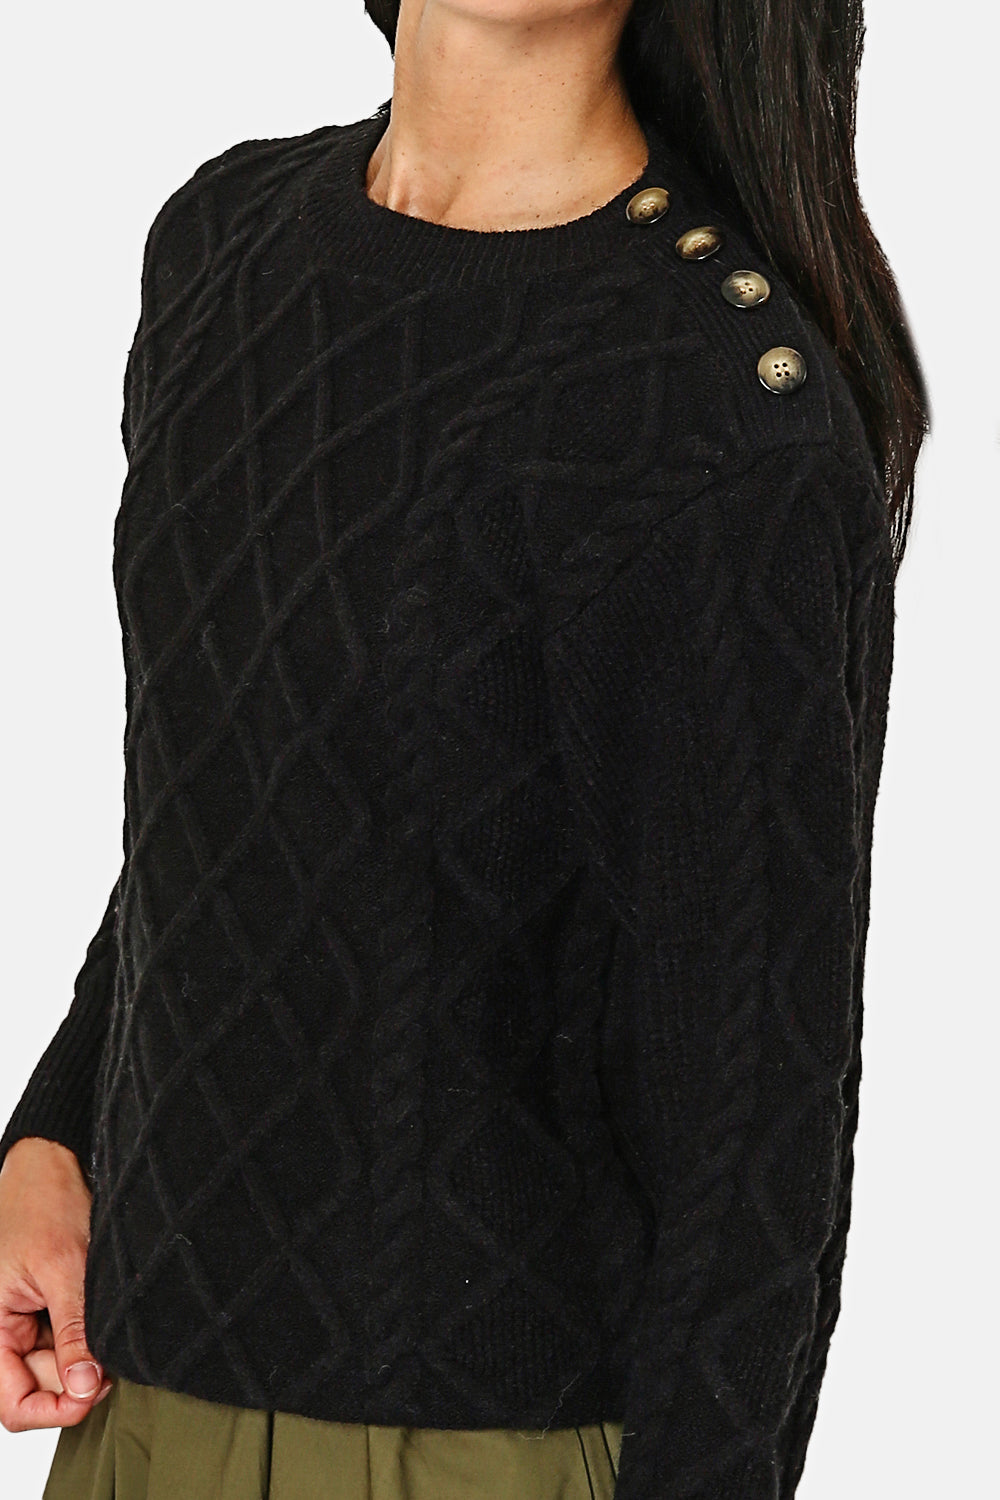 Slightly high neck sweater with fancy buttons on the shoulder